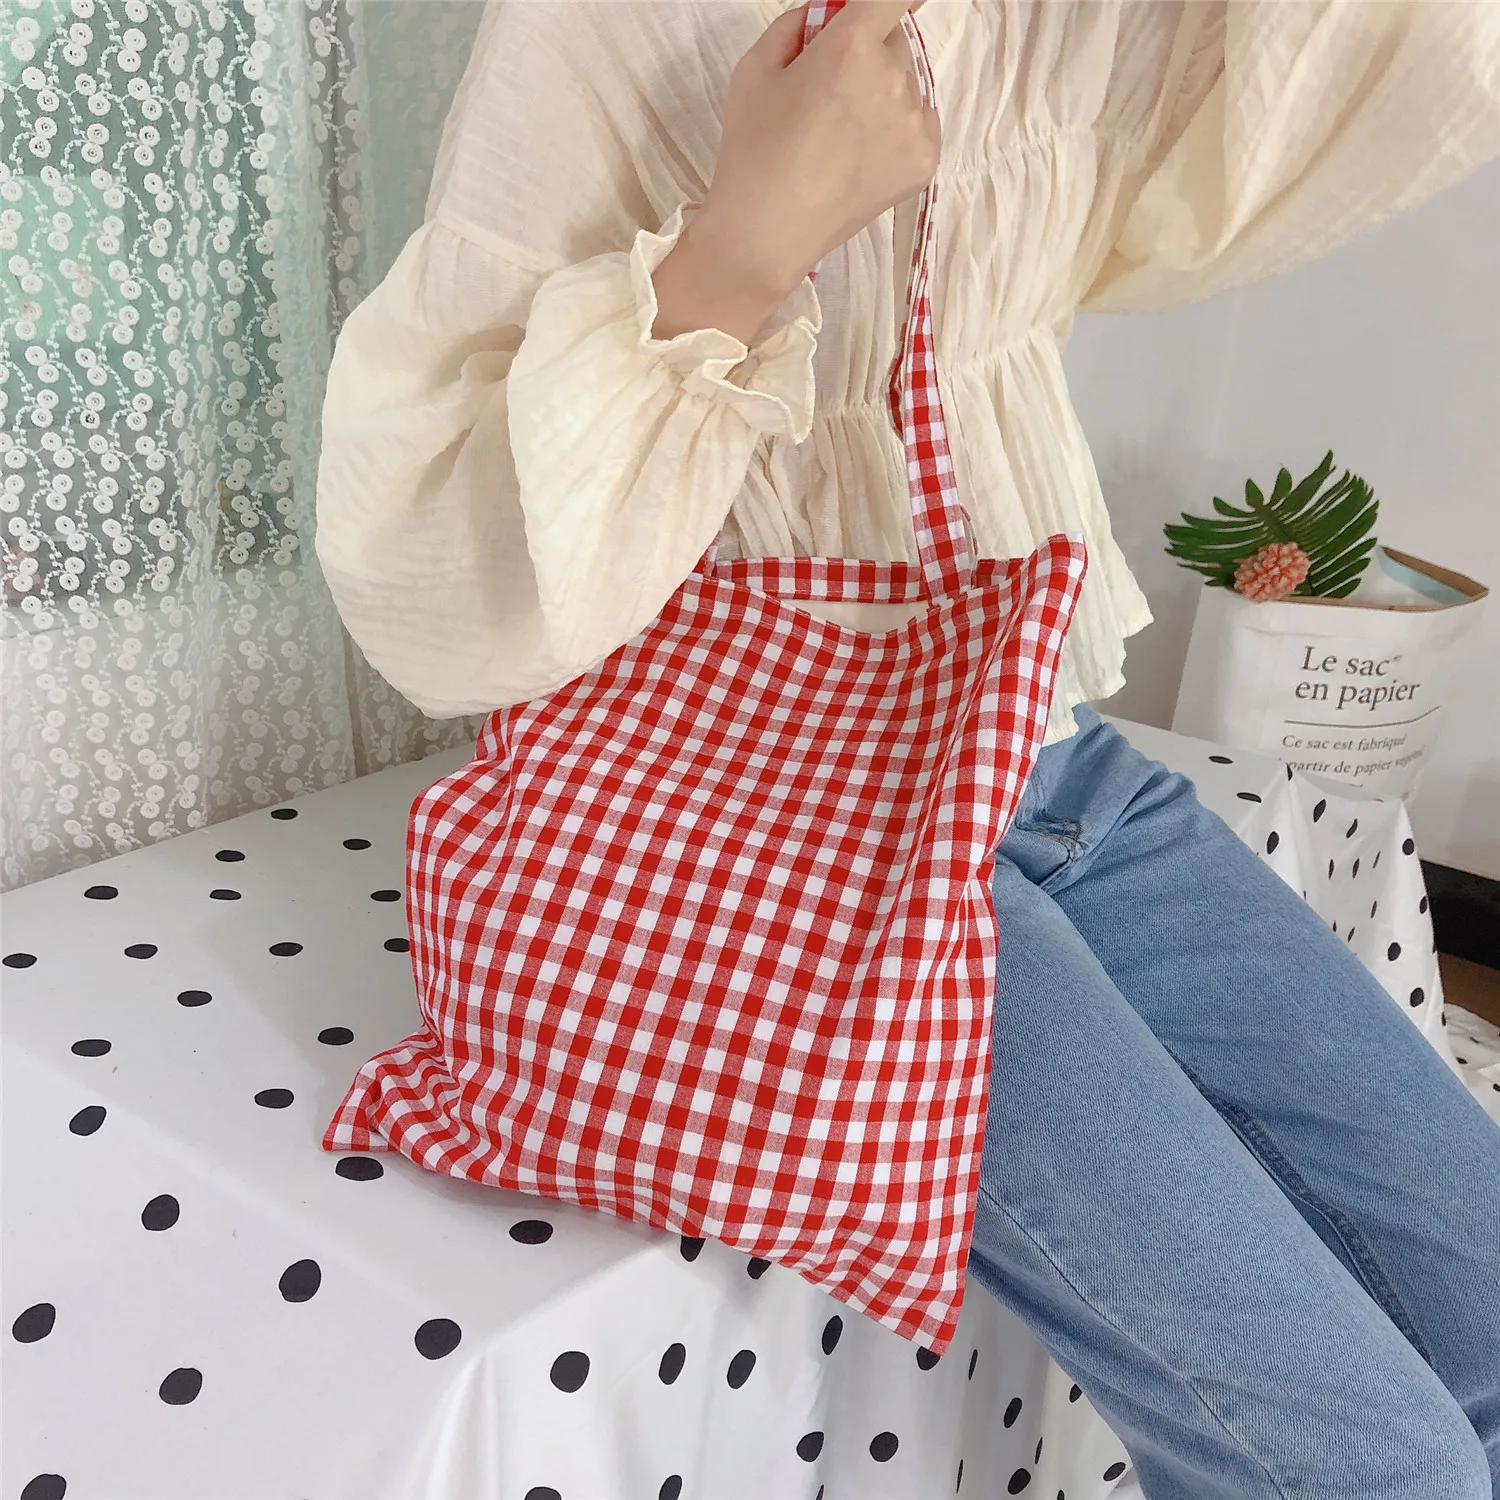 Cotton Canvas Shopping Tote Bag Plaid Reusable Foldable Large Capacity Woman Lady Shopper Handbags Book Bags For Students Girls